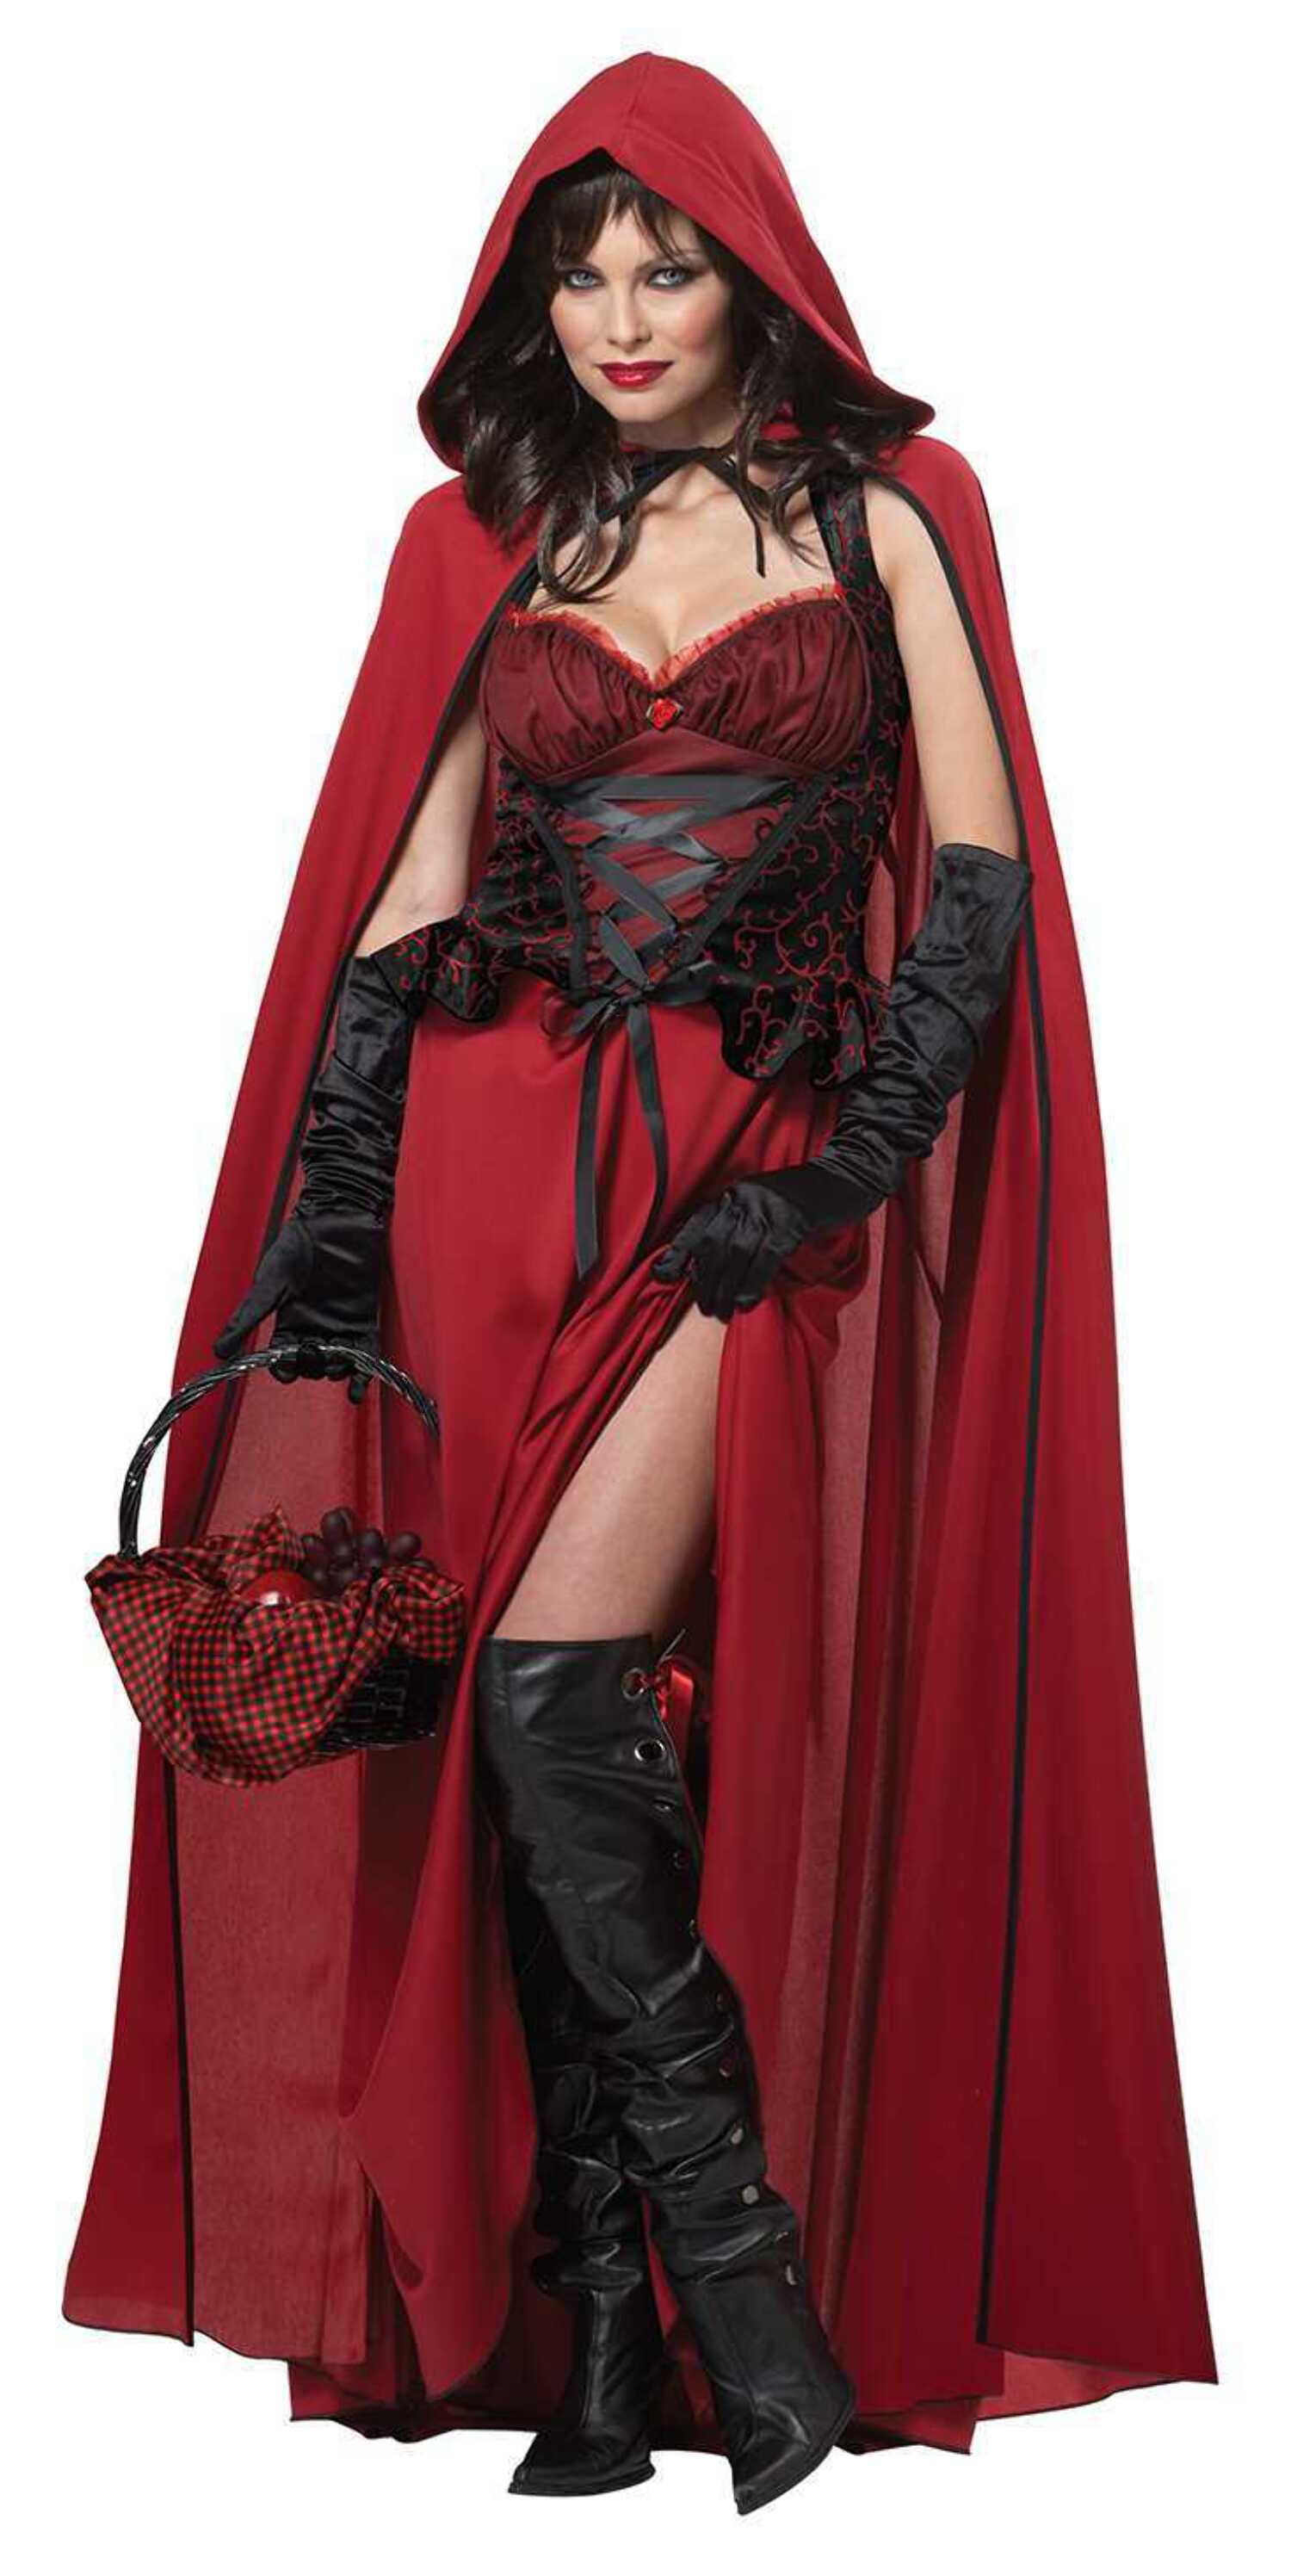 crystal farquharson recommends naughty red riding hood images pic